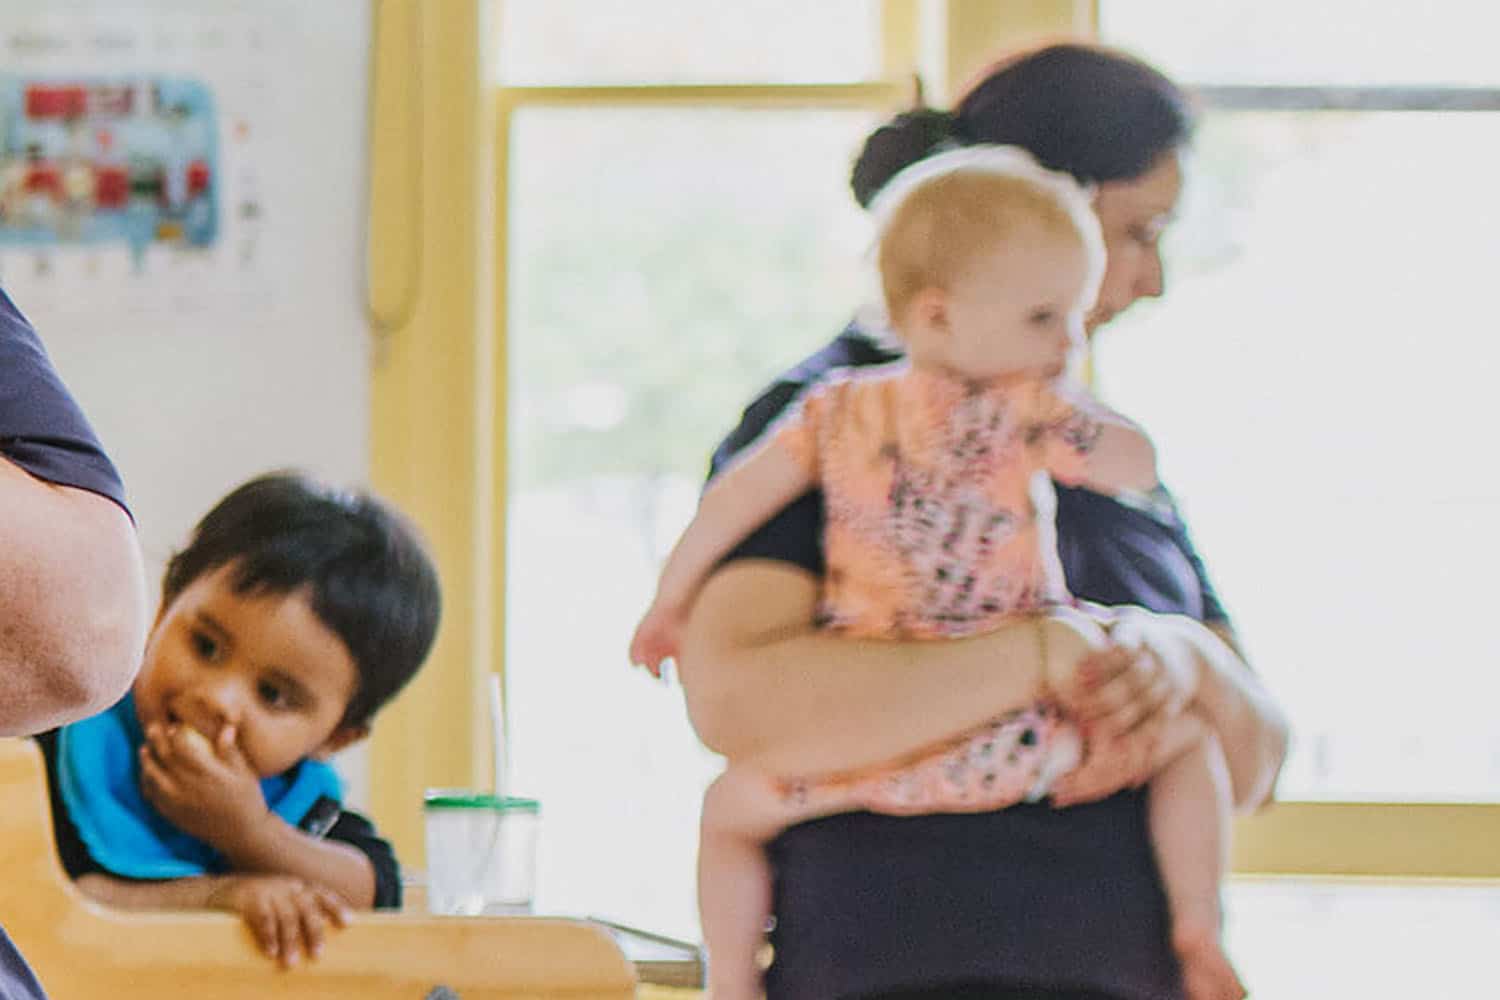 Toddler in a highchair eating and teacher holding an infant in lunch-room.